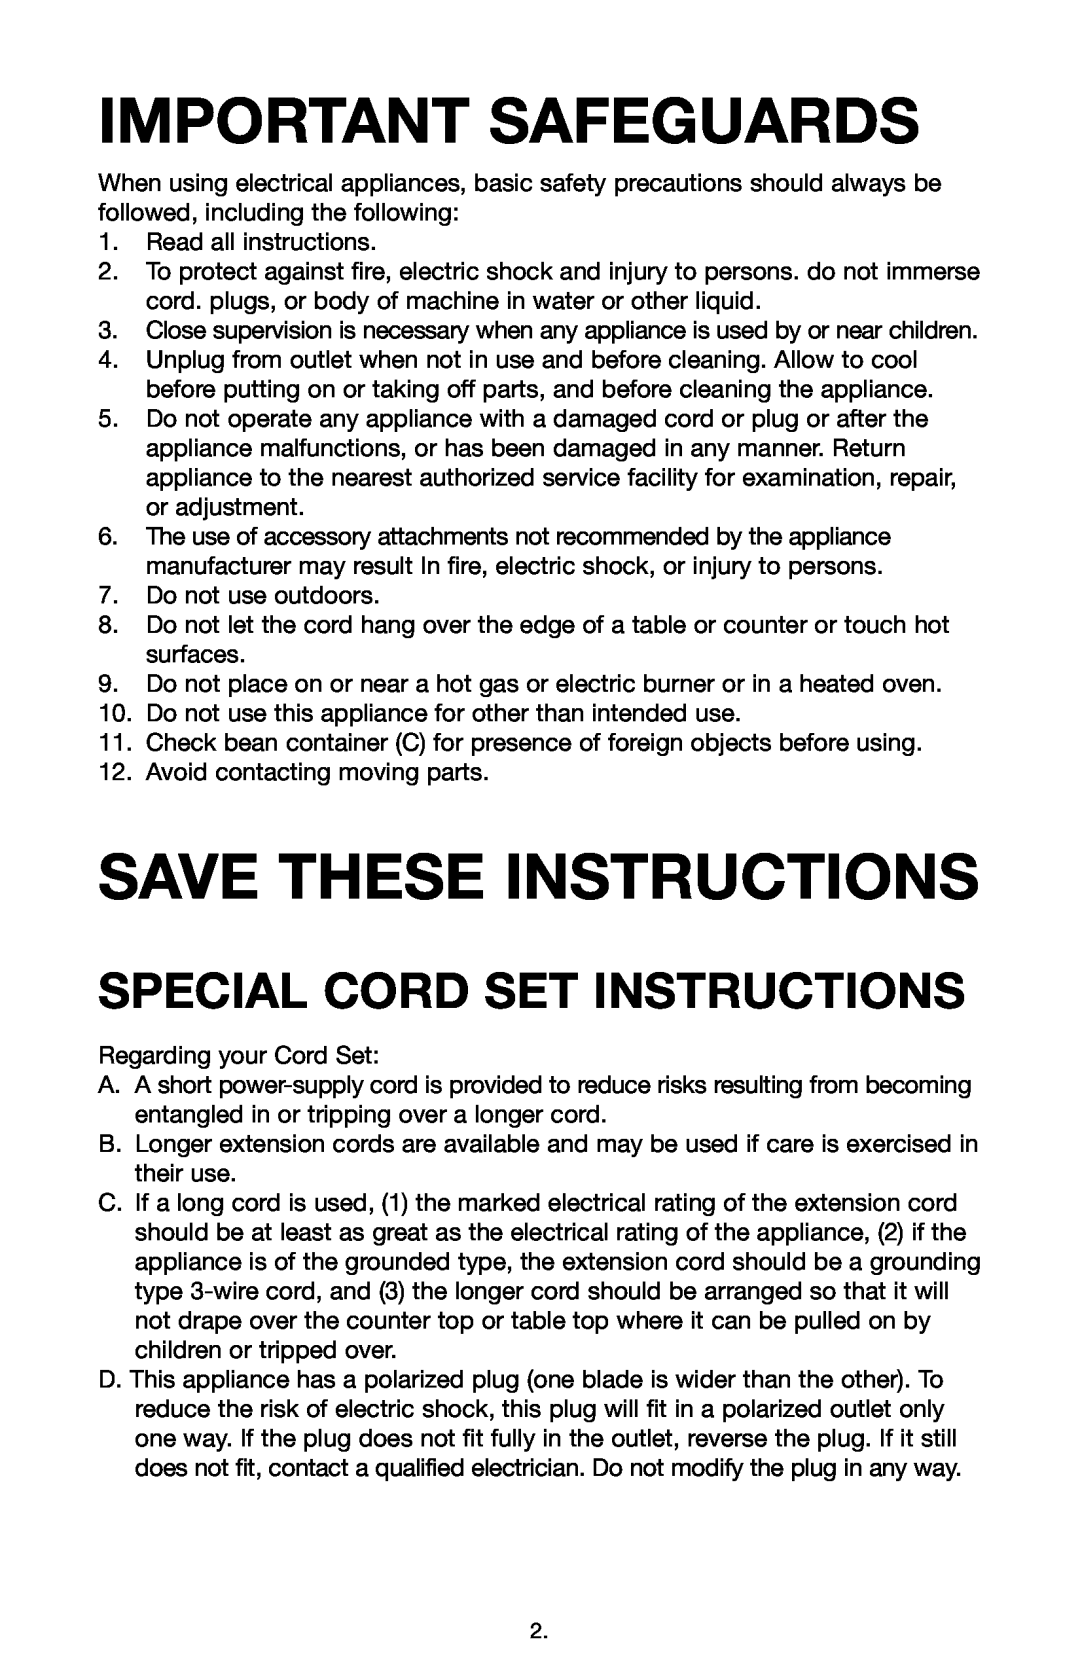 Capresso 585, 580 warranty Important Safeguards, Save These Instructions, Special Cord Set Instructions 